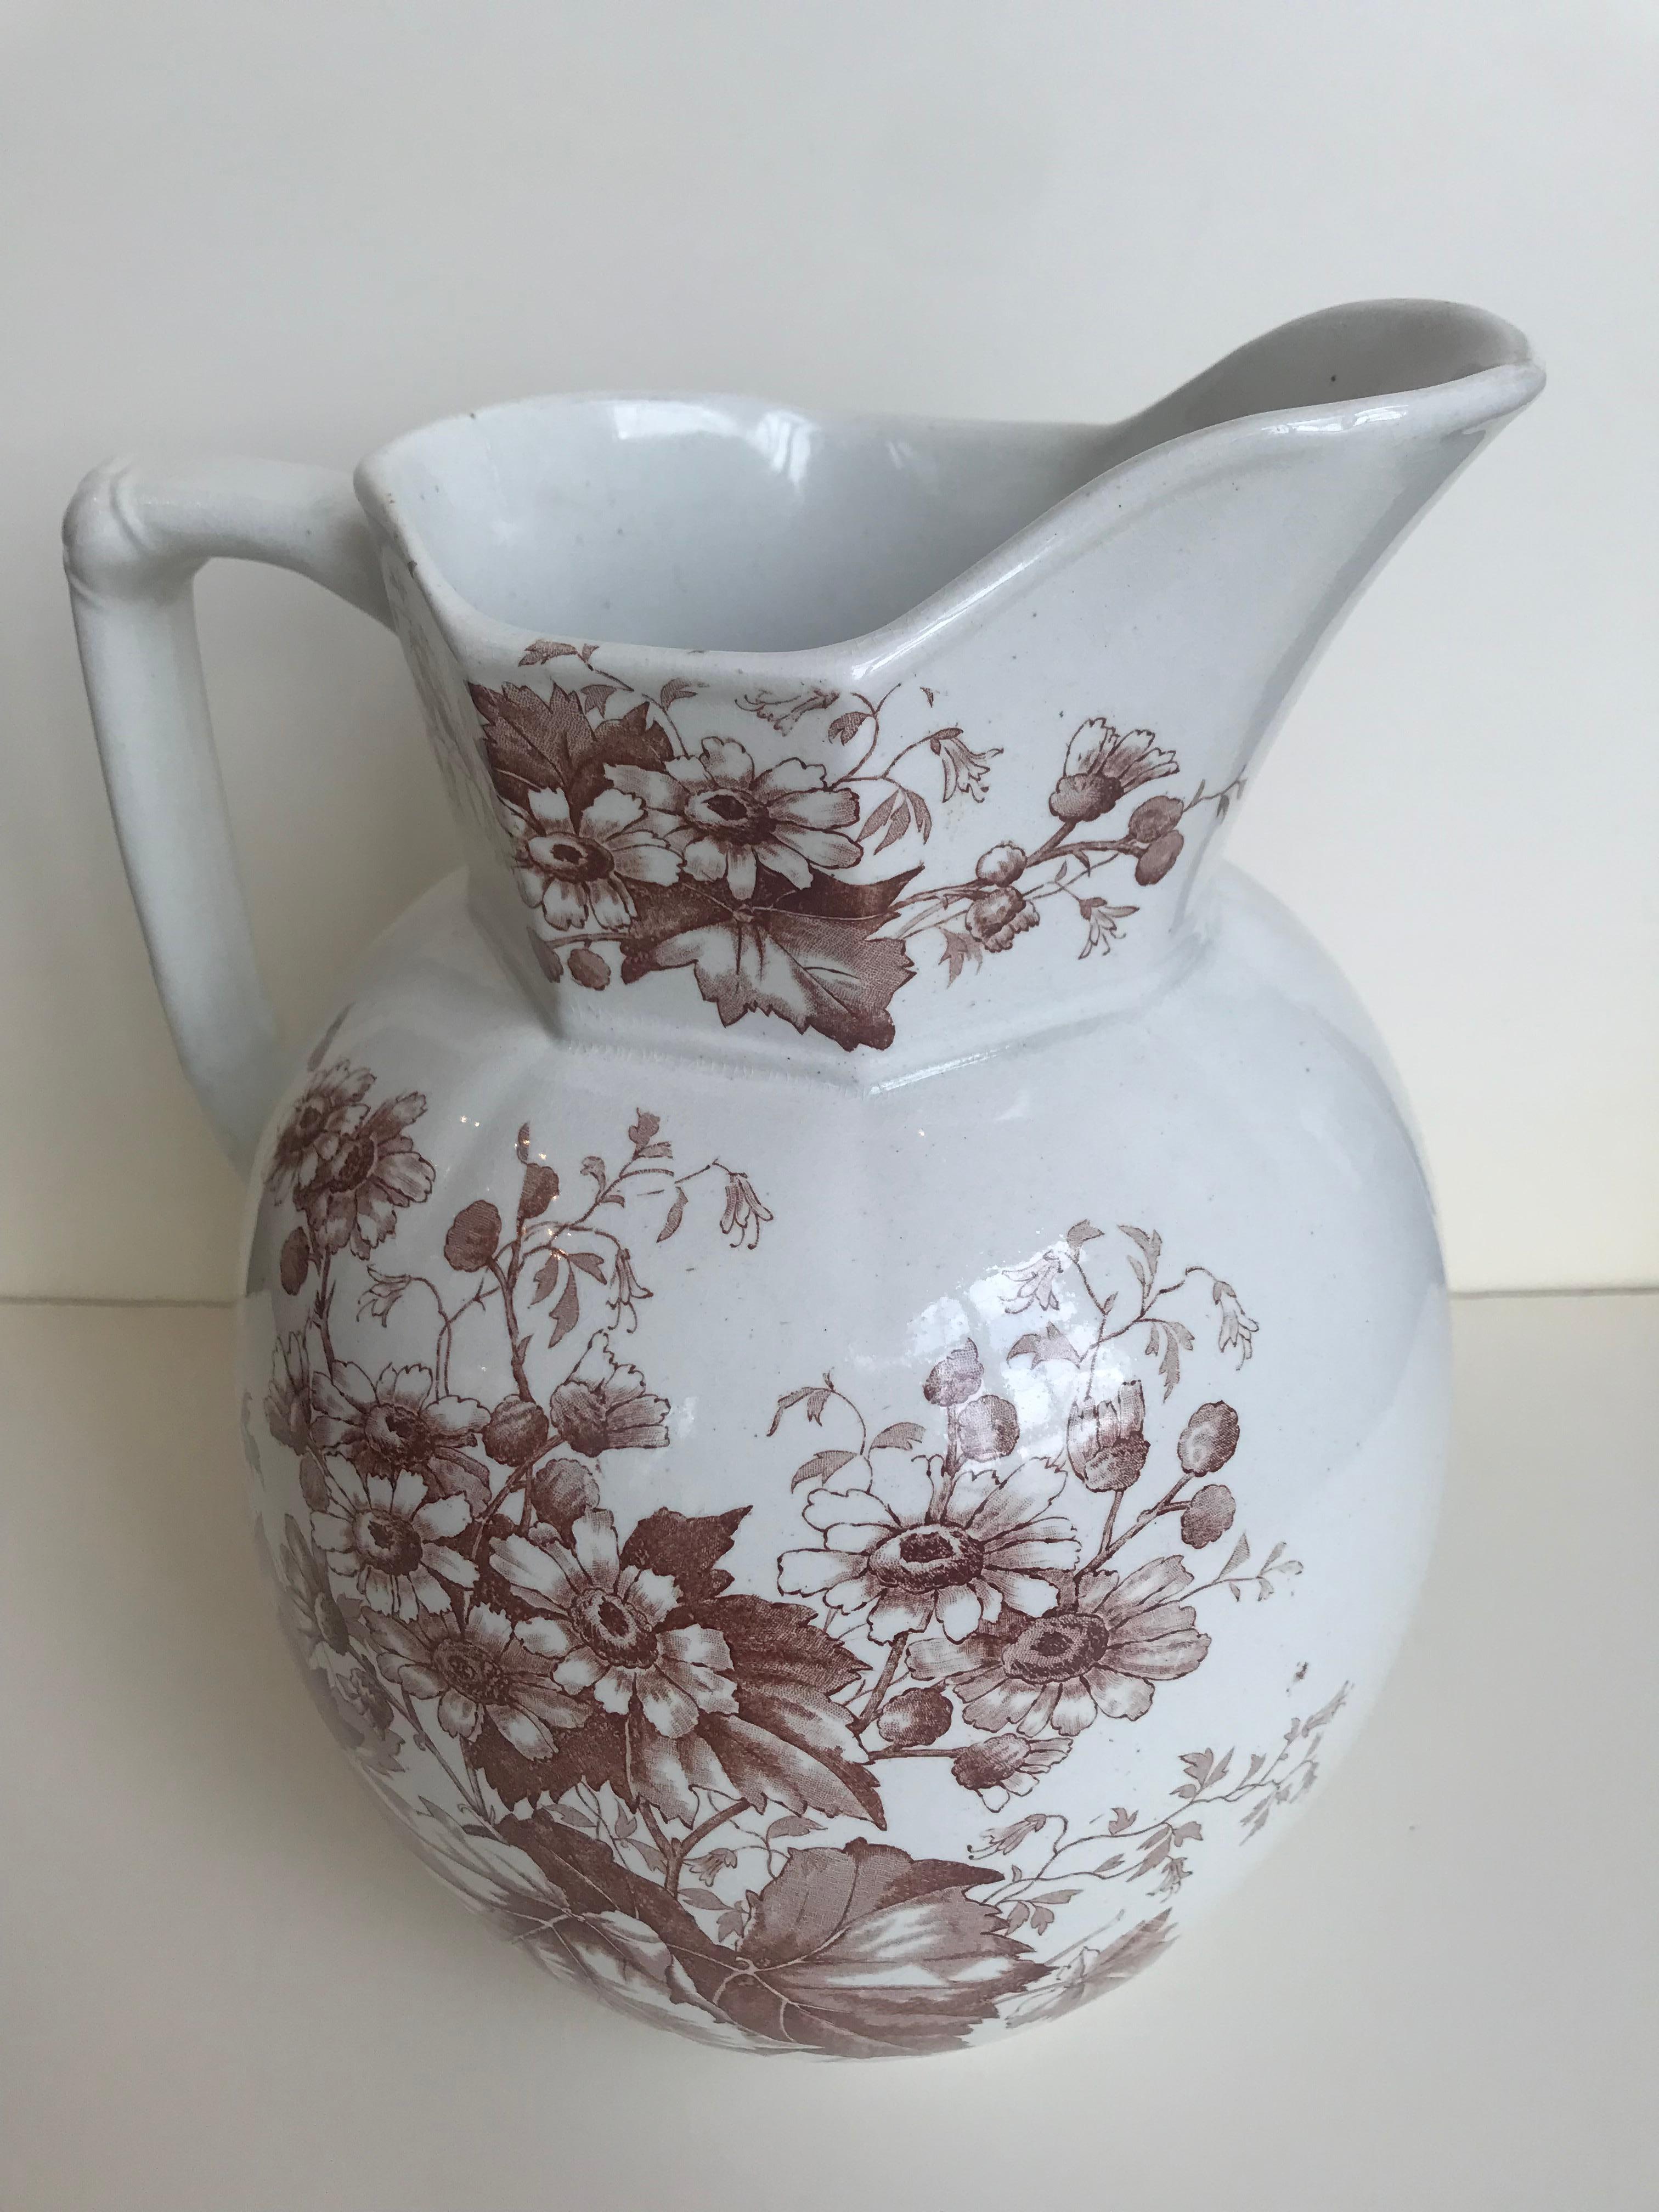 19th century English floral ironstone pitcher; squared handle.
Anchor, B, 146 marking on bottom.